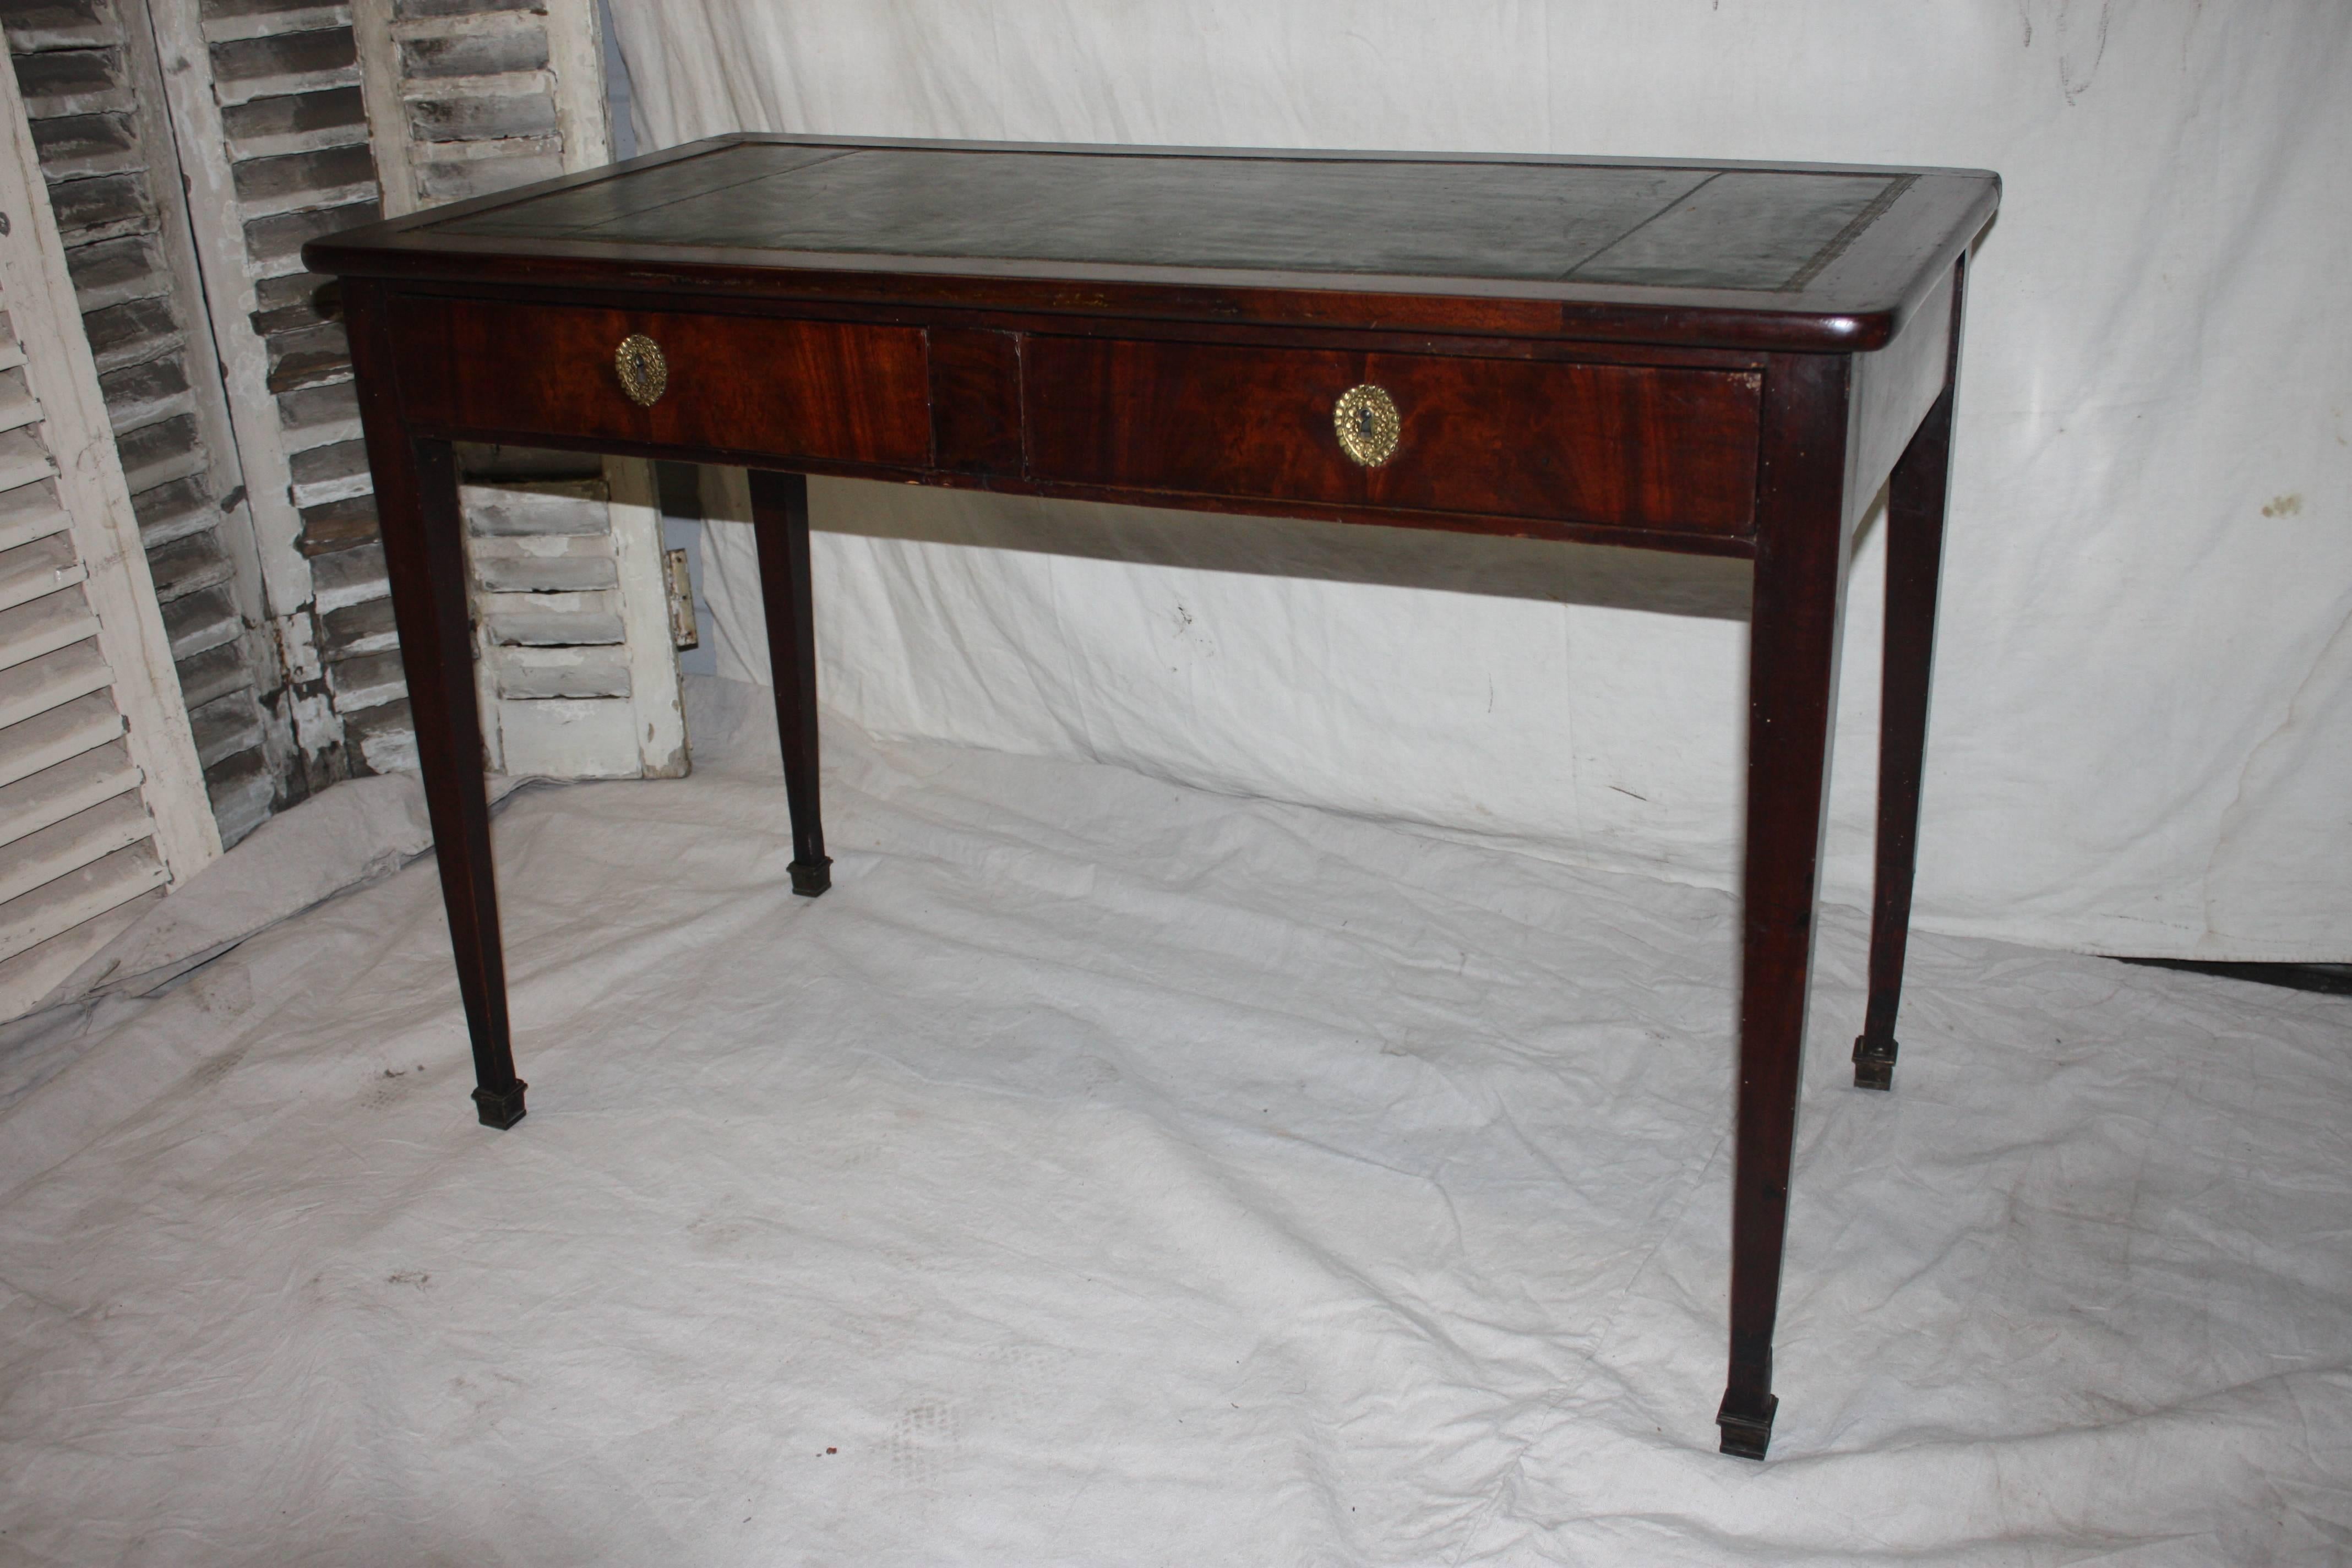 Early 19th century French desk, Louis XVI style. The wood is in flamed mahogany.